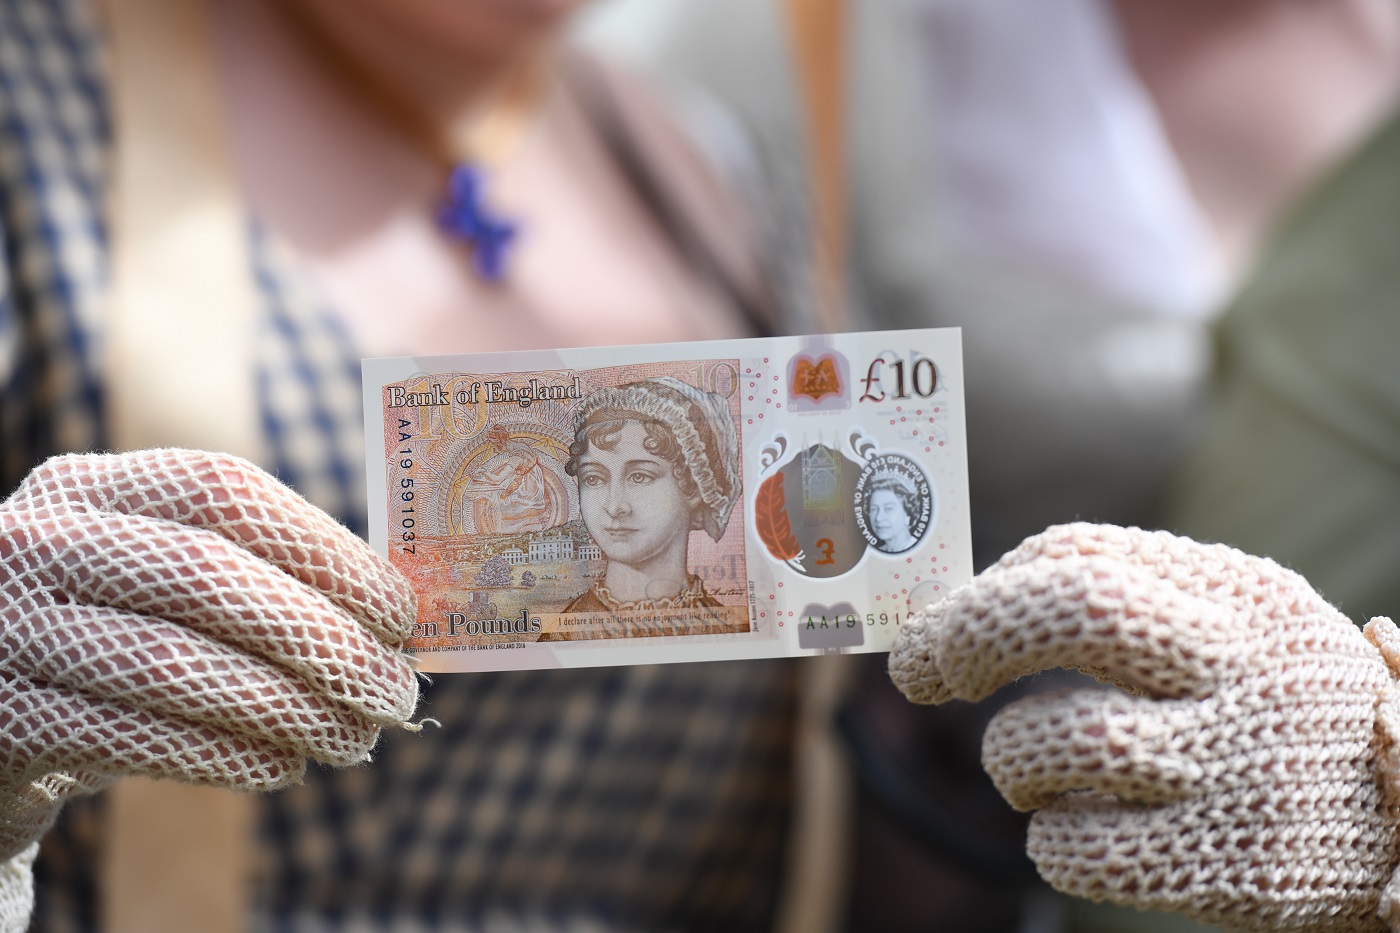 People in period costume with the new £10 note featuring Jane Austen, which marks the 200th anniversary of Austen's death, during the unveiling at Winchester Cathedral.